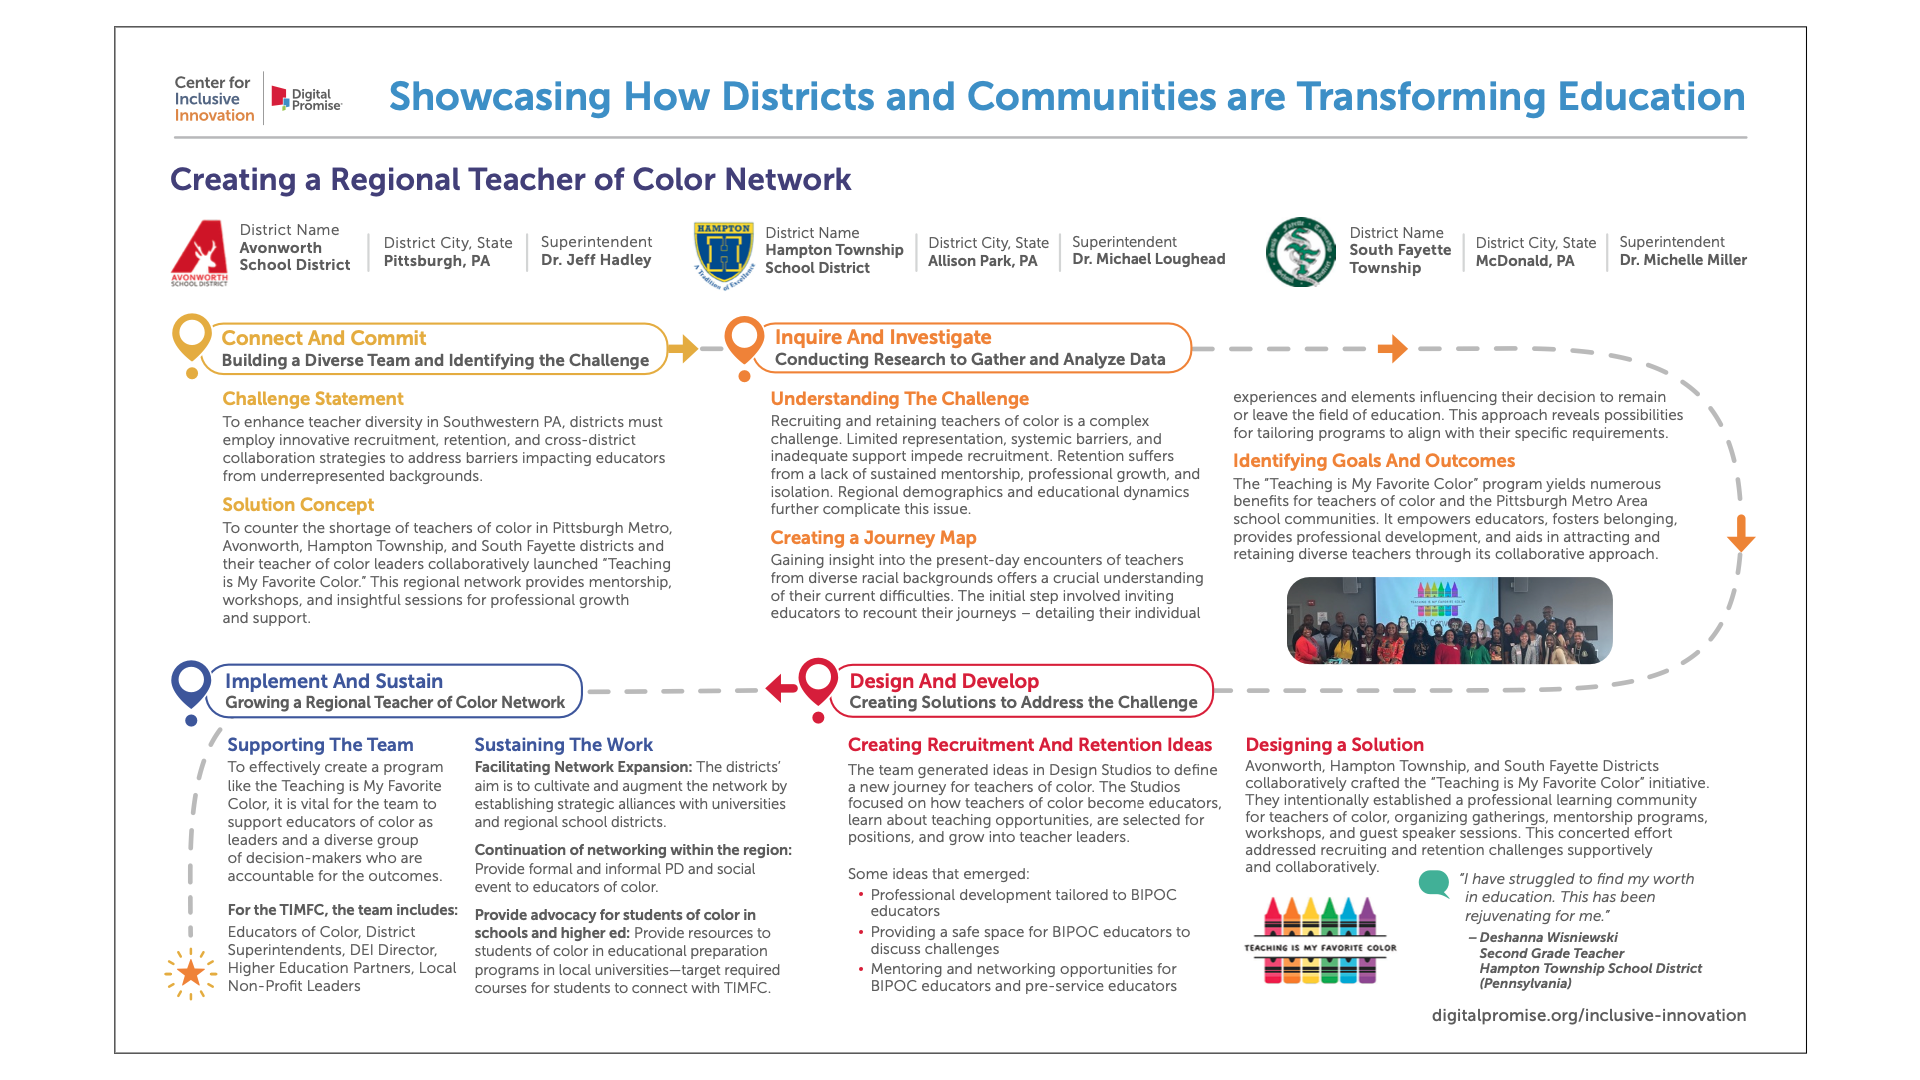 Creating a Regional Teacher of Color Network